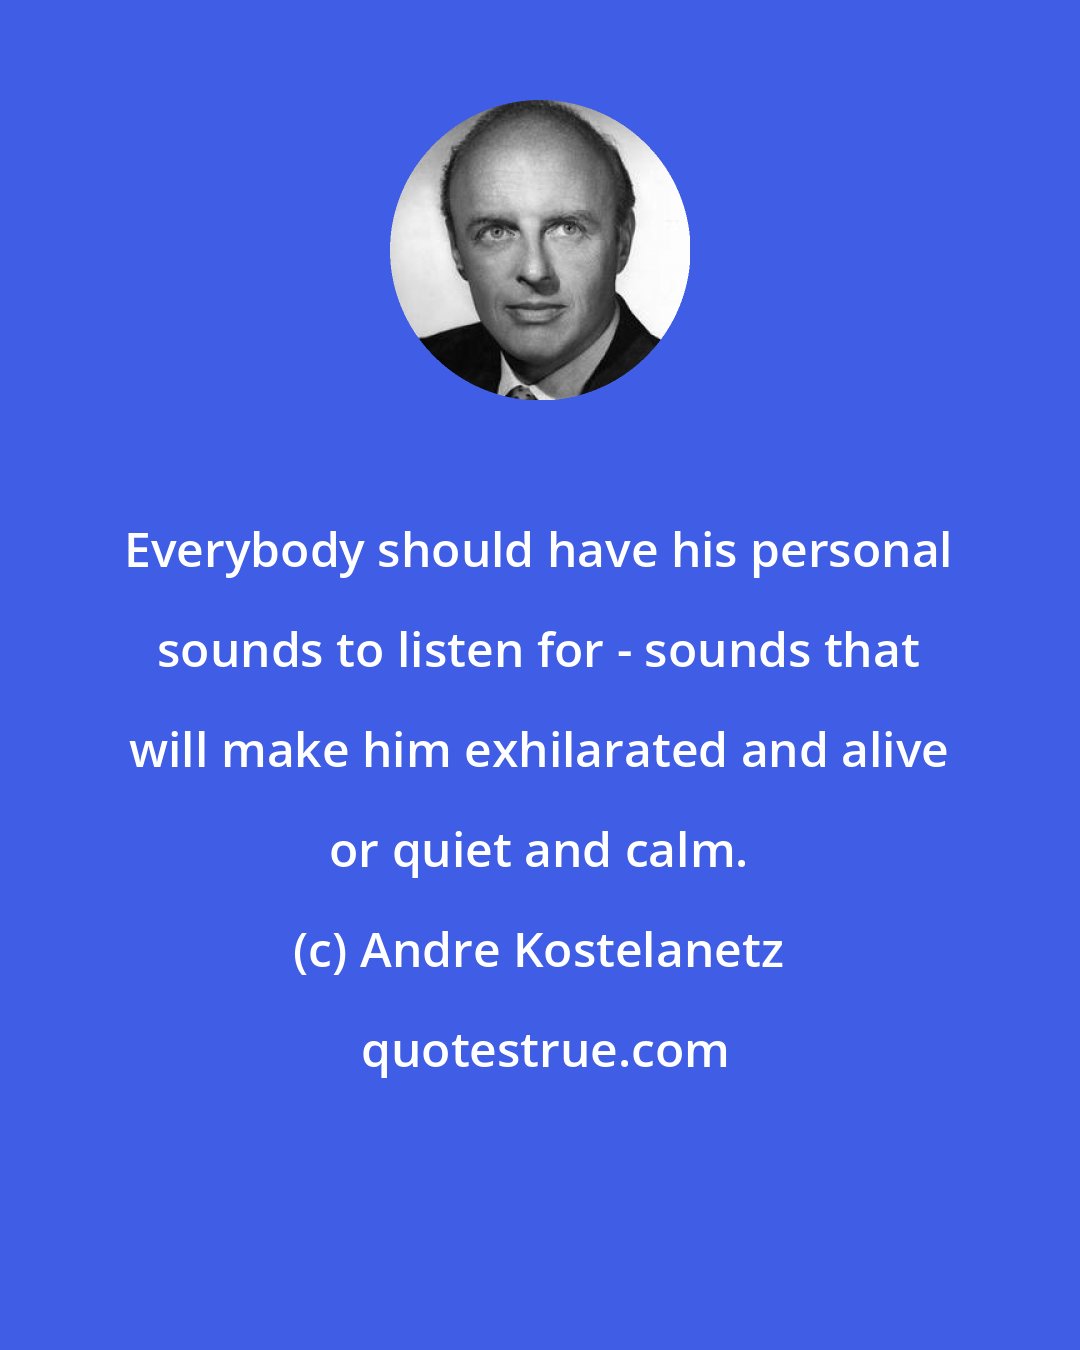 Andre Kostelanetz: Everybody should have his personal sounds to listen for - sounds that will make him exhilarated and alive or quiet and calm.